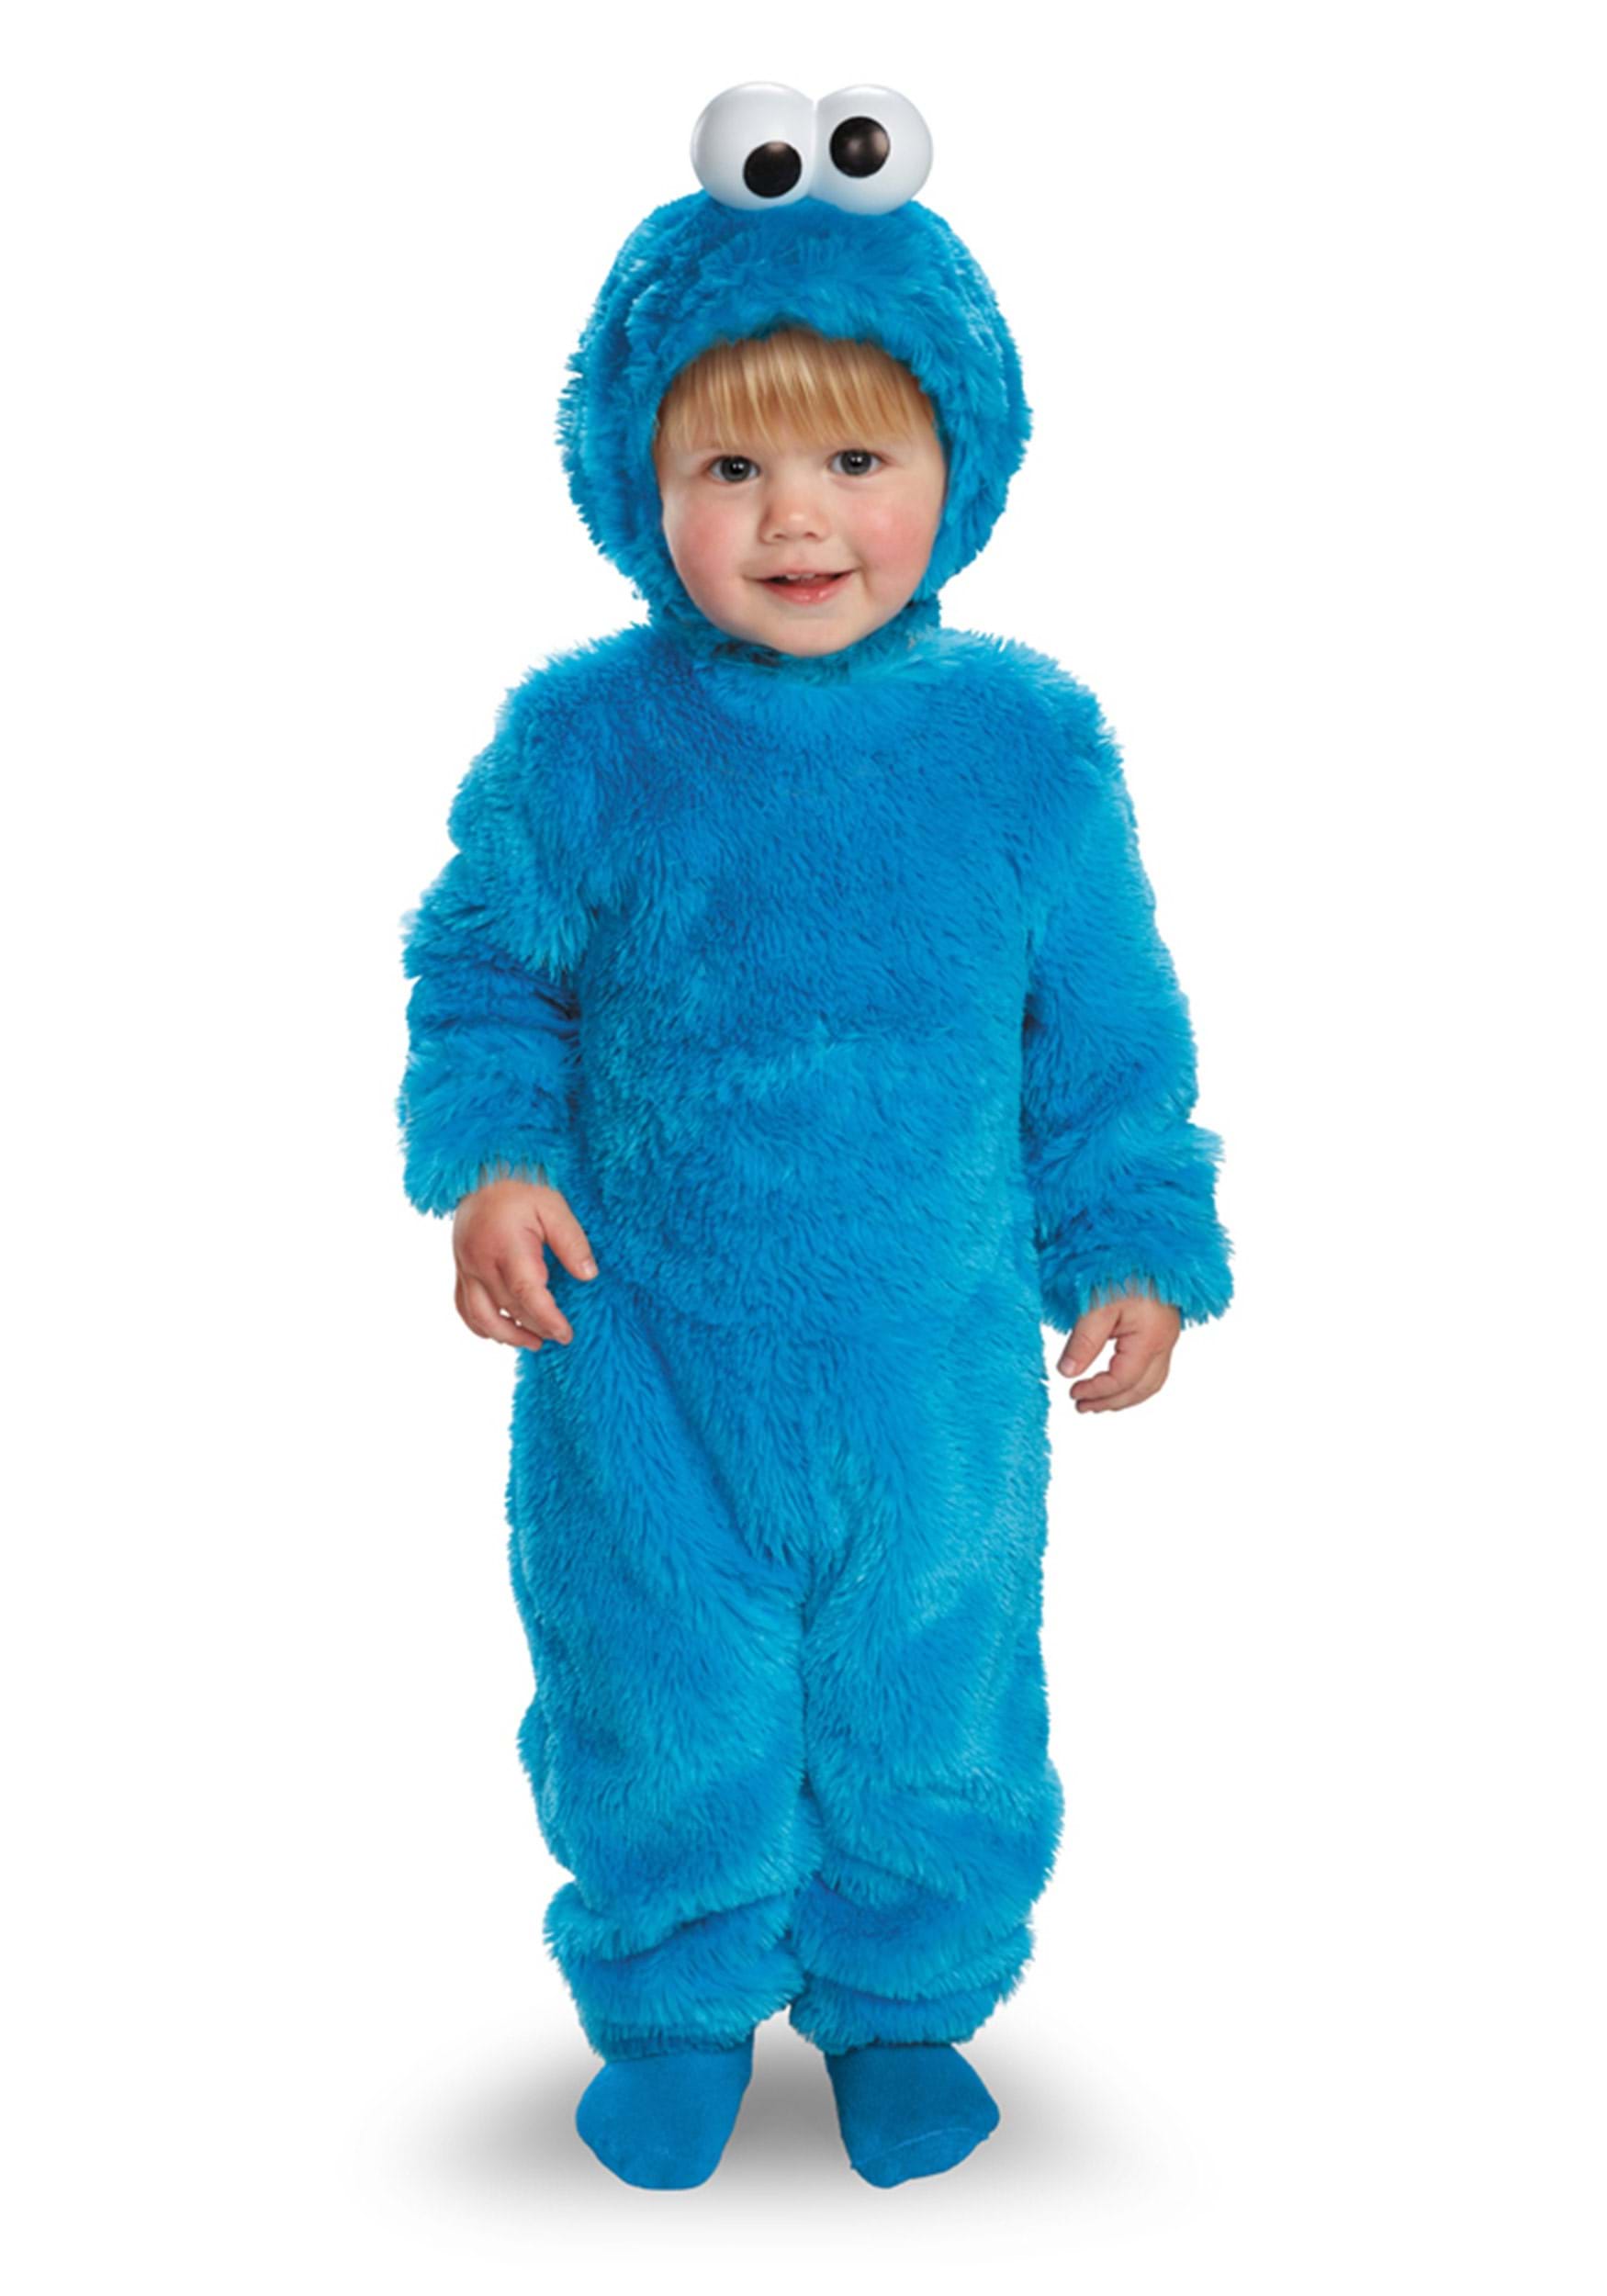 Toddler Cookie Monster Costume w/ Light-Up Eyes